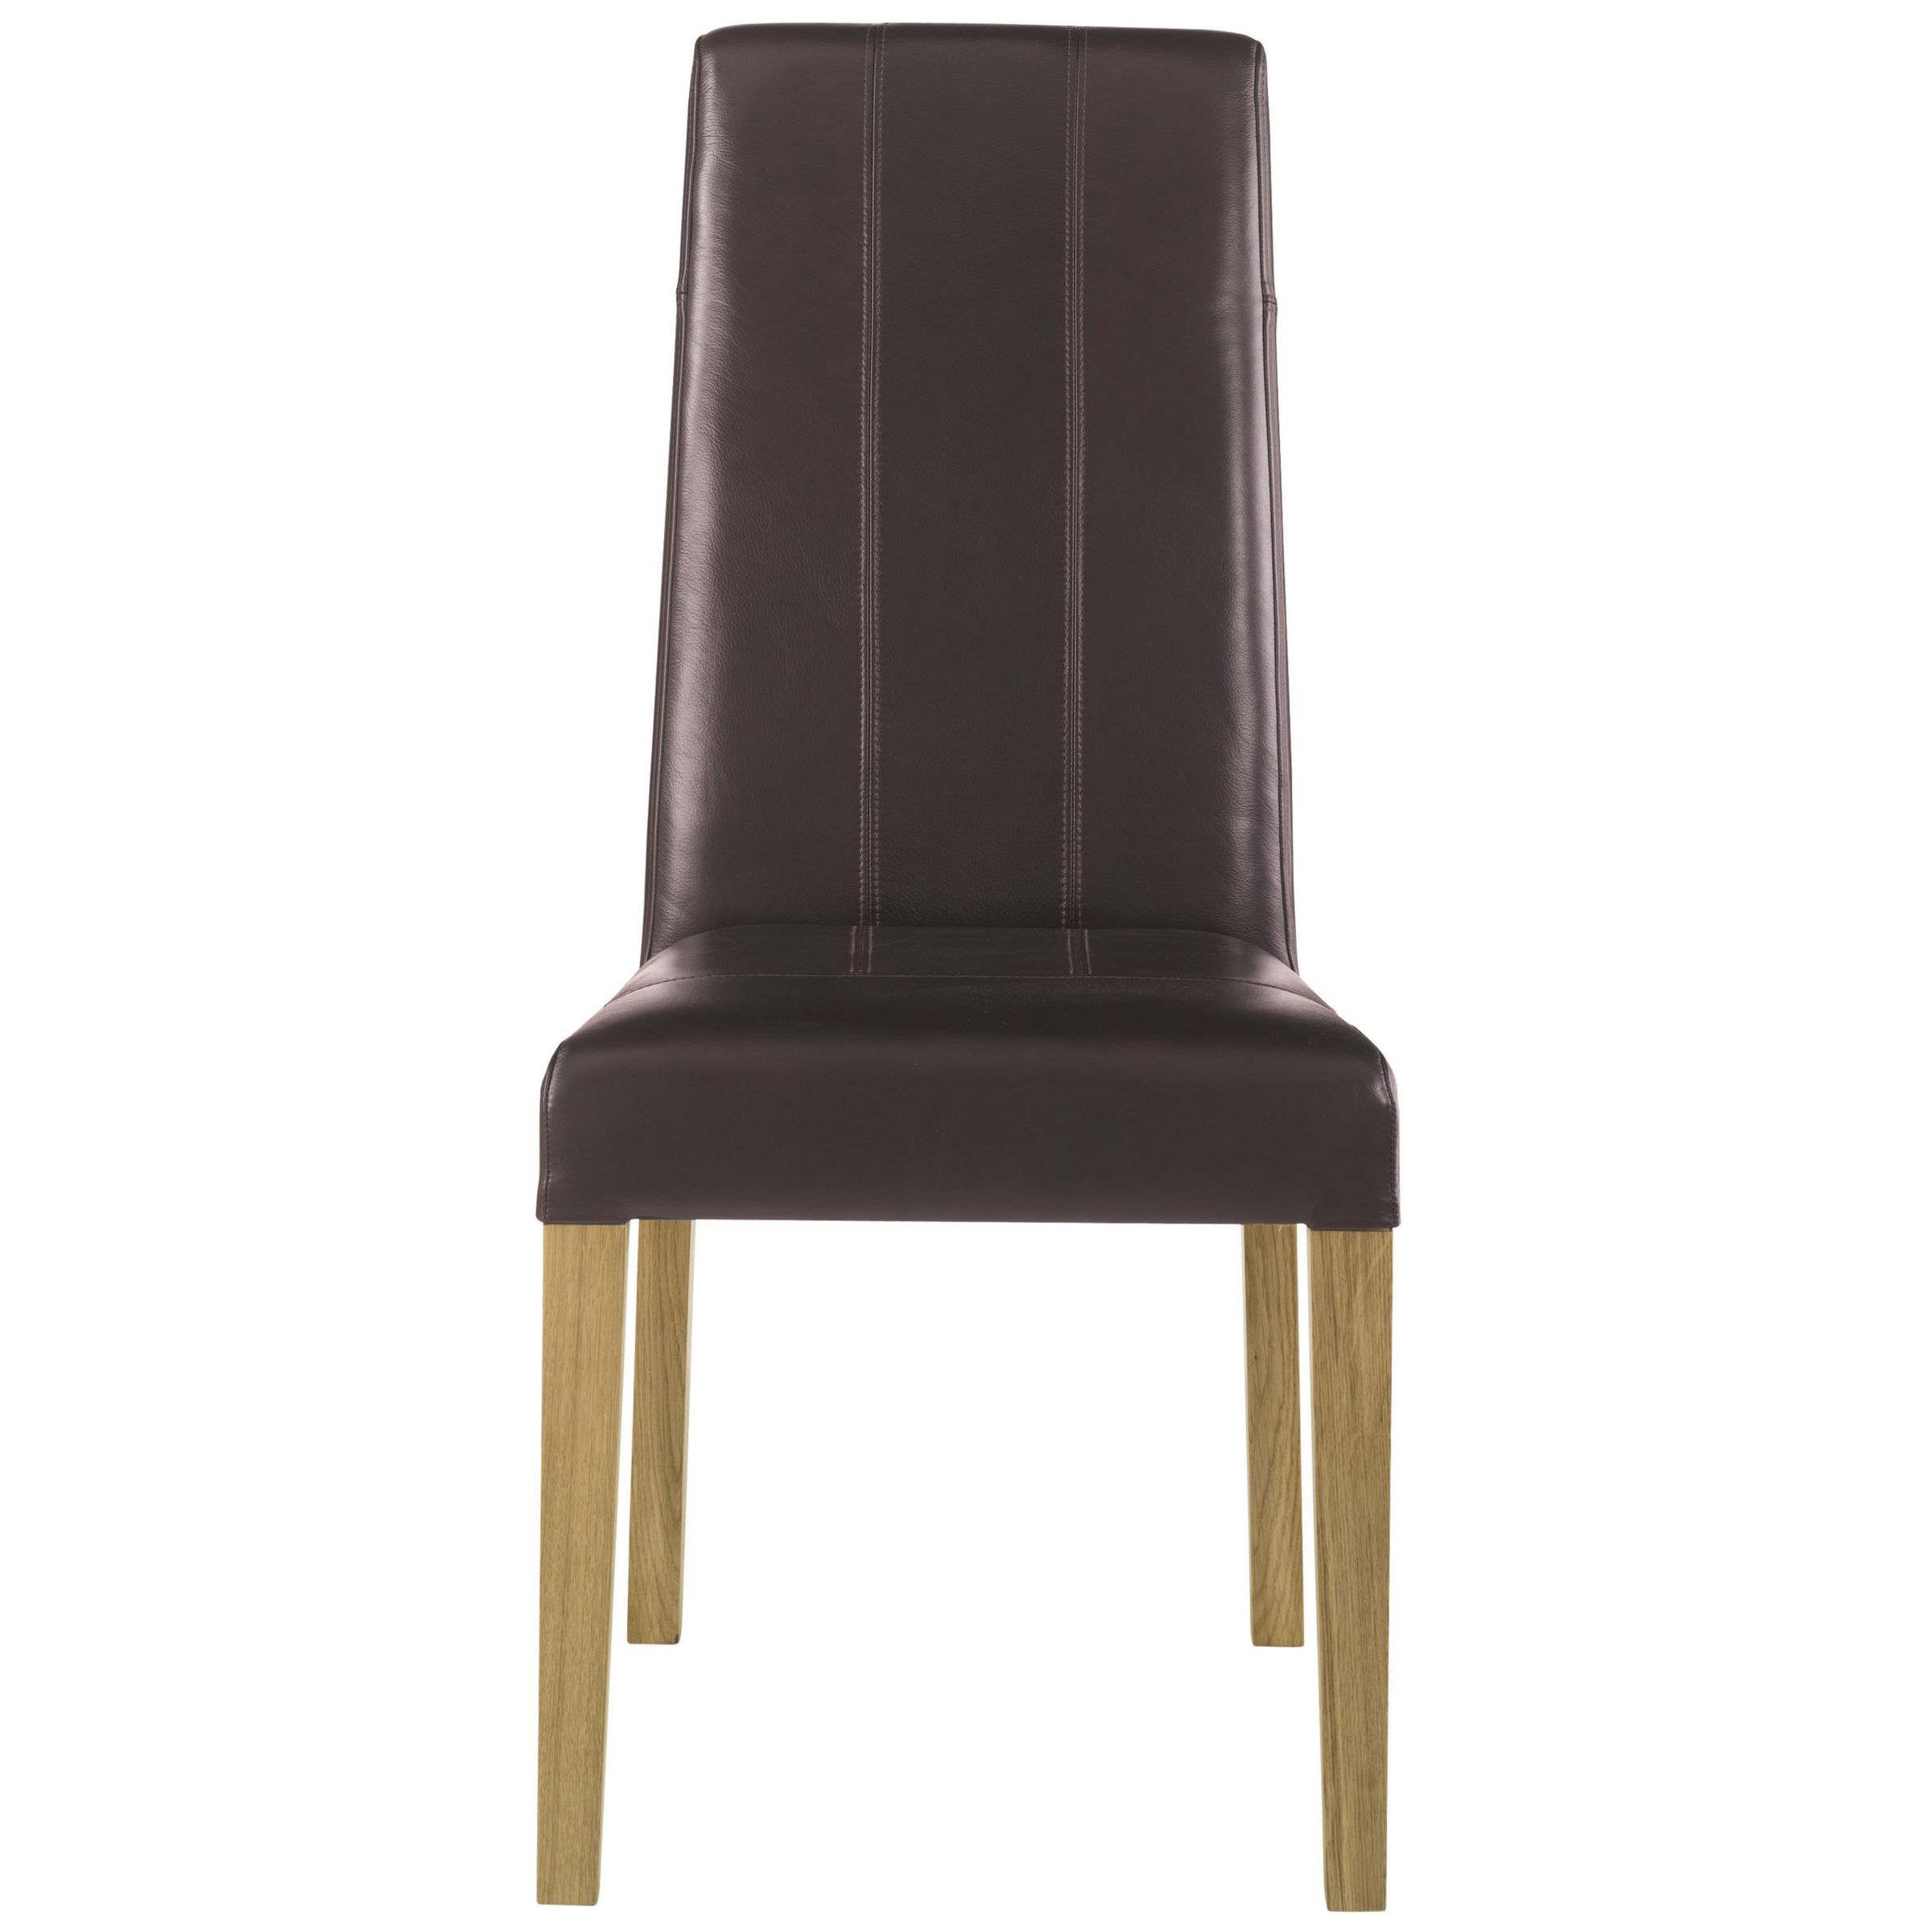 Summit High-Backed Dining Chair, Leather at John Lewis